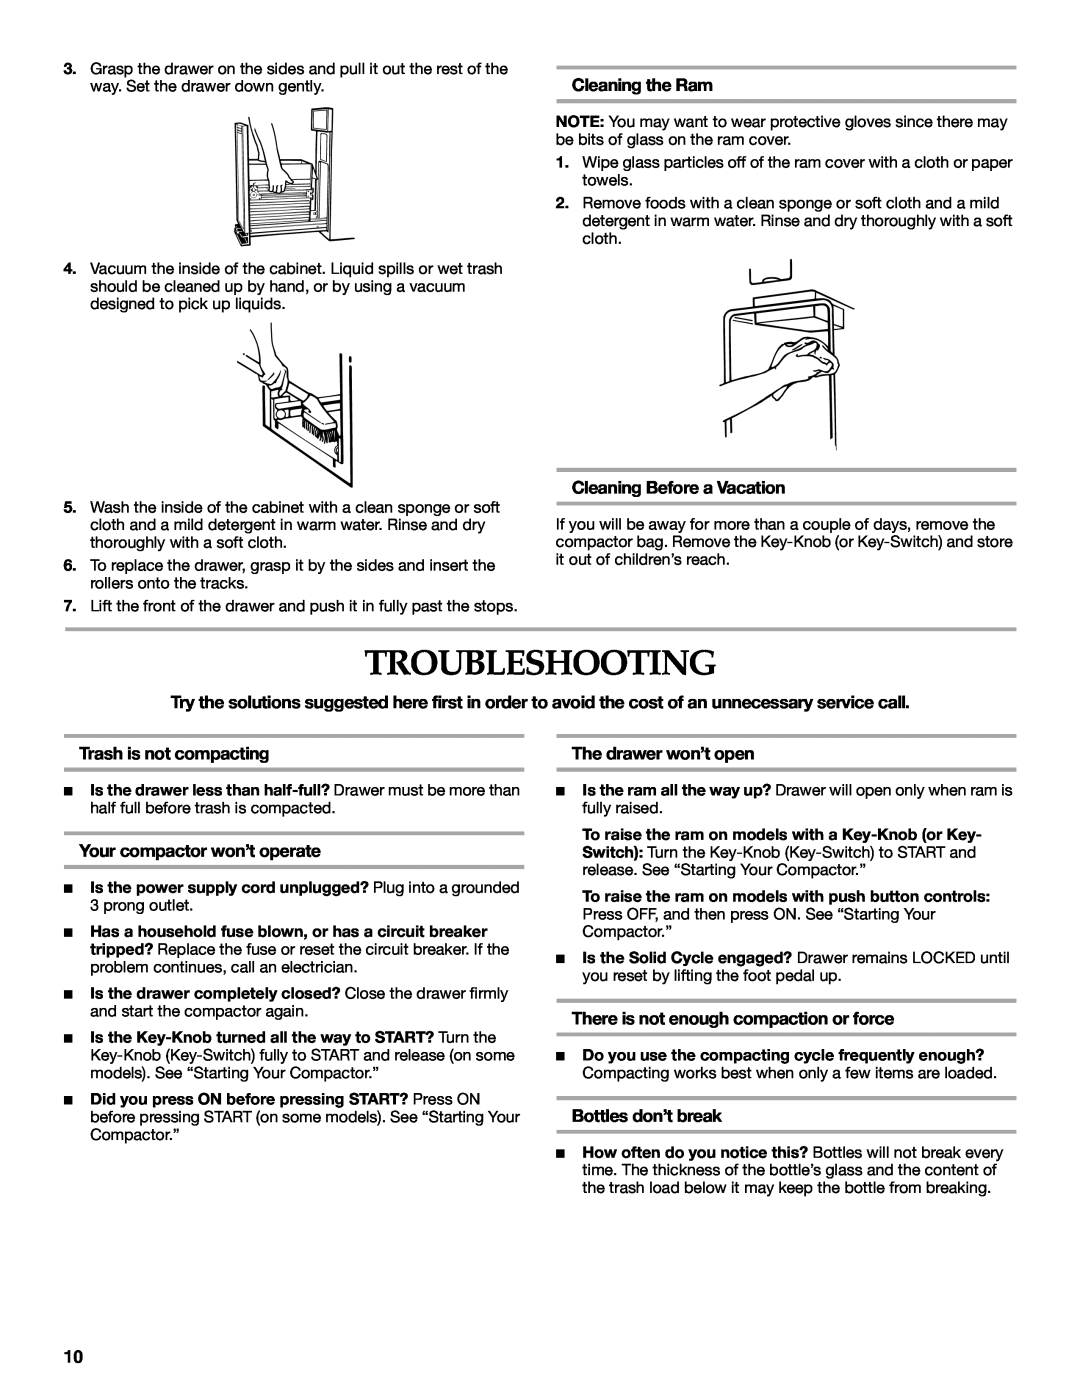 KitchenAid 9872215B manual Troubleshooting, Cleaning the Ram, Cleaning Before a Vacation, Trash is not compacting 